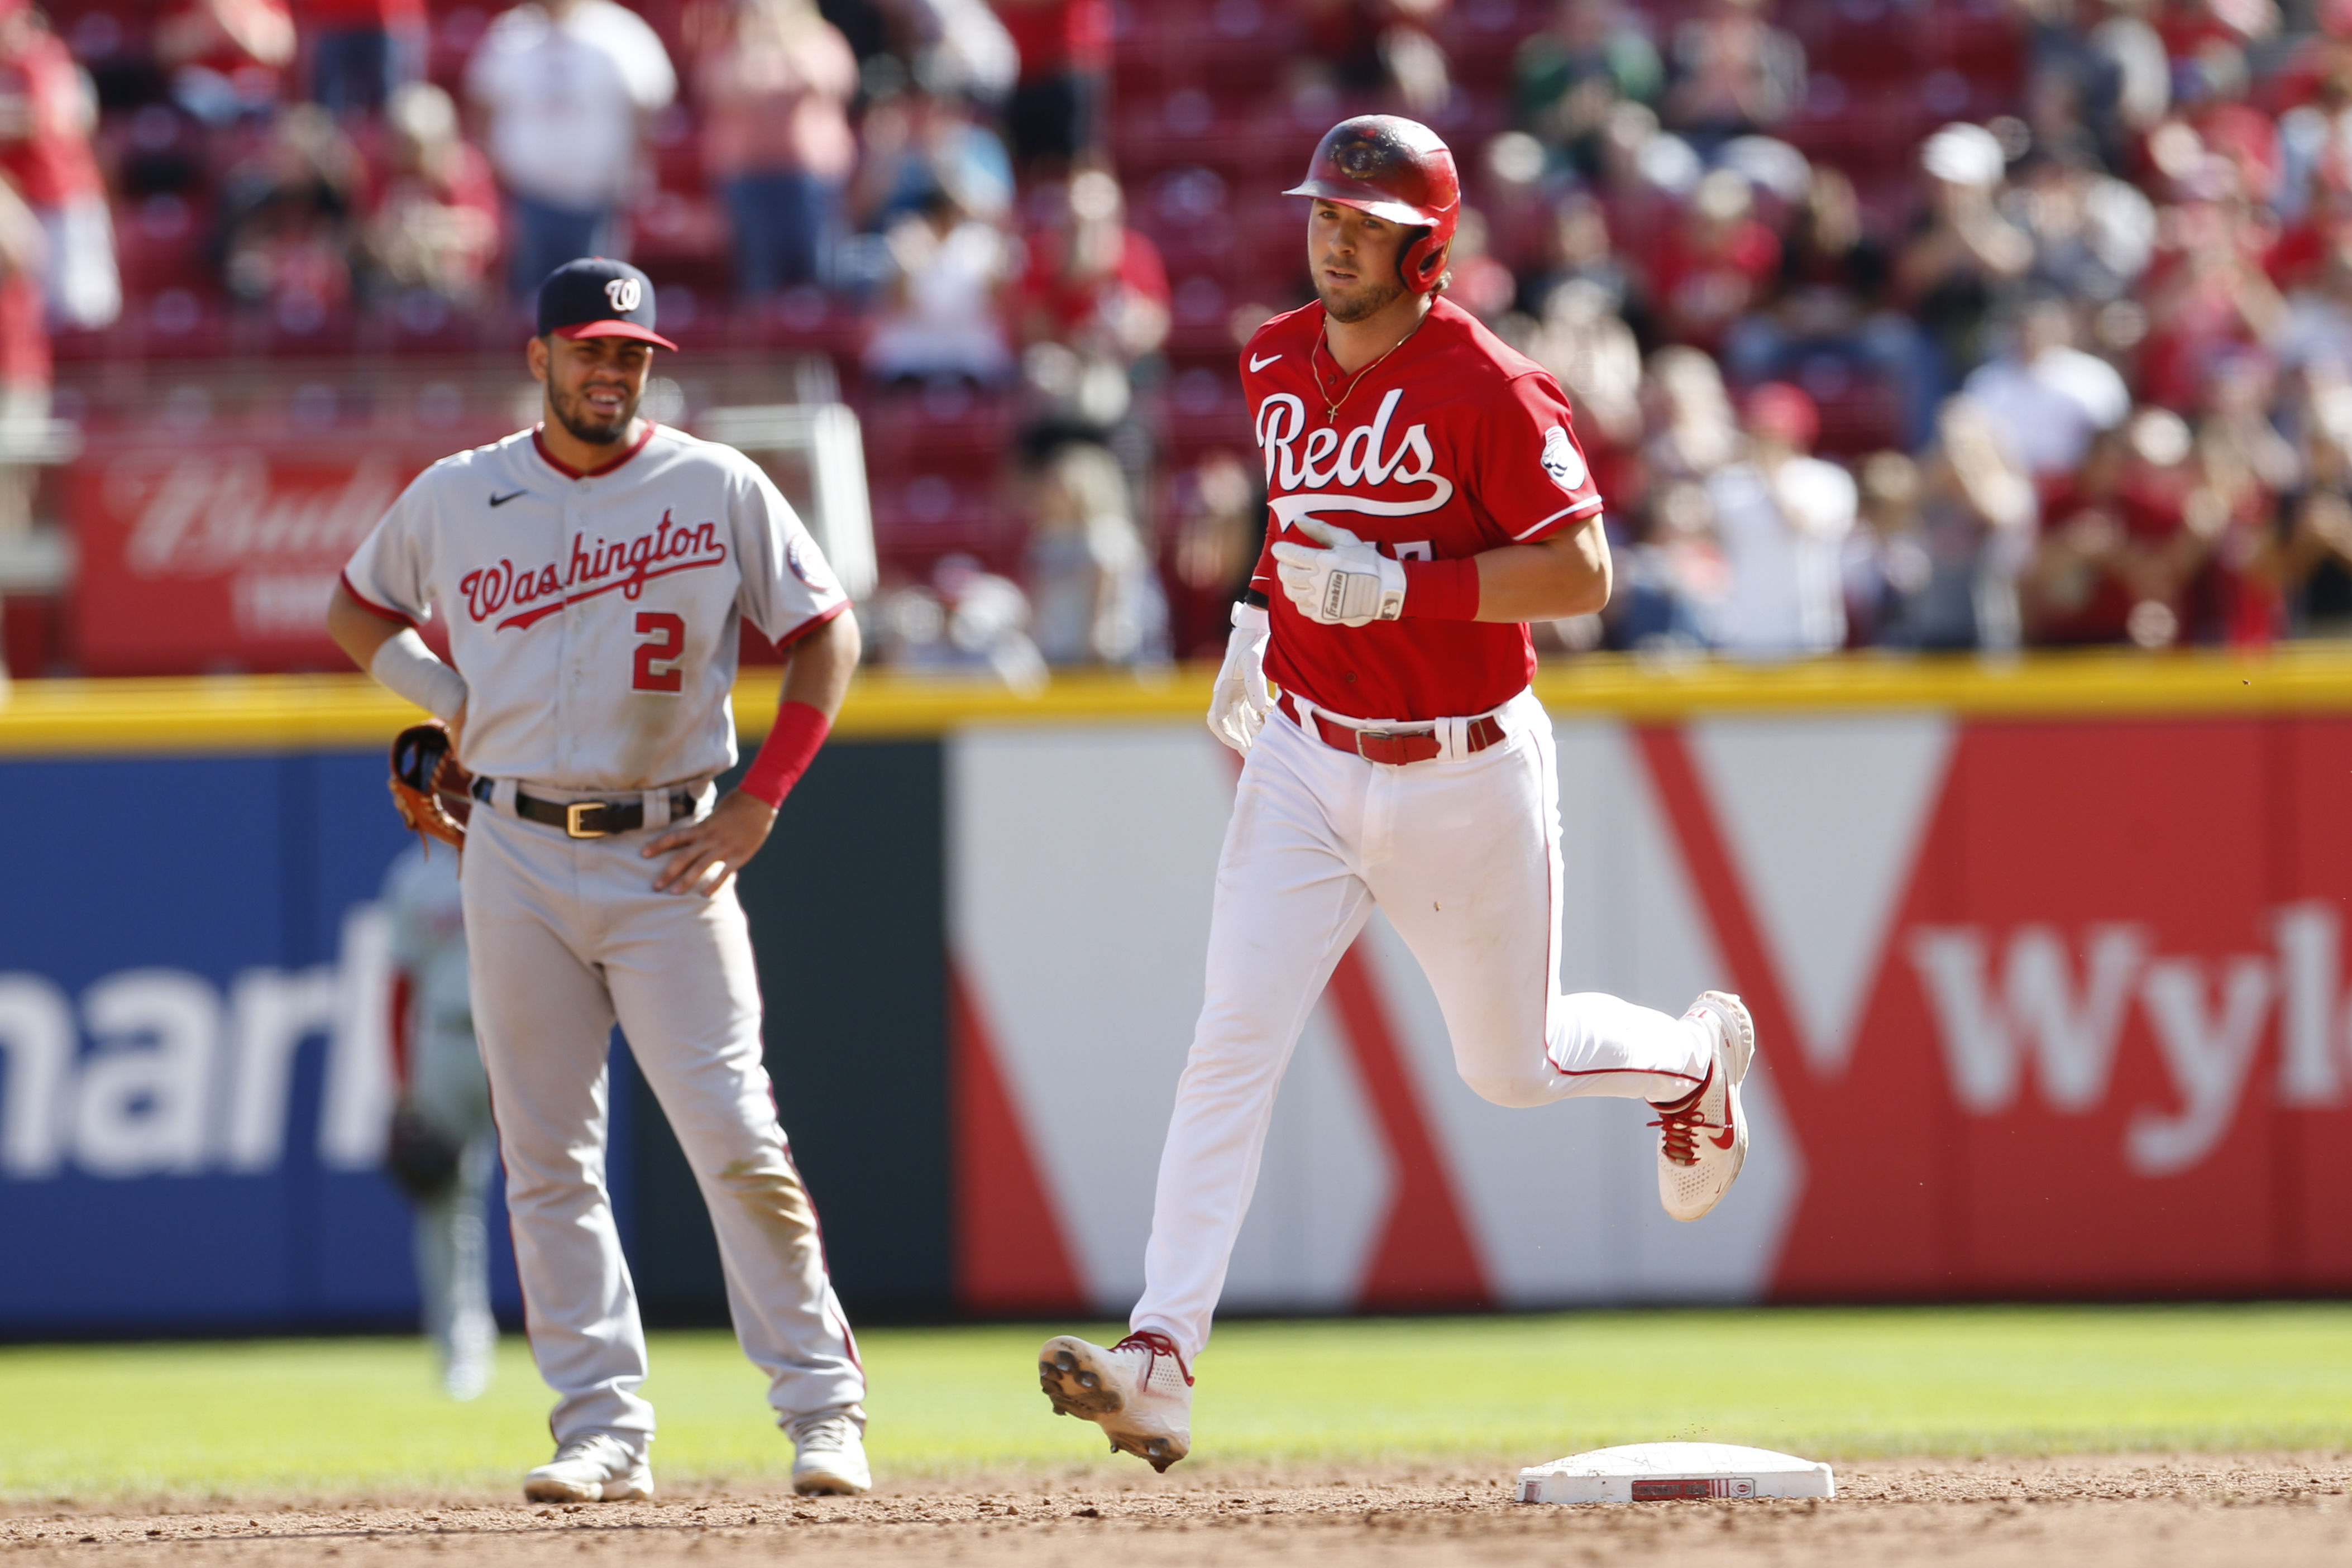 Reds rout Nationals 9-2 to keep slim playoff hopes alive - Washington Times